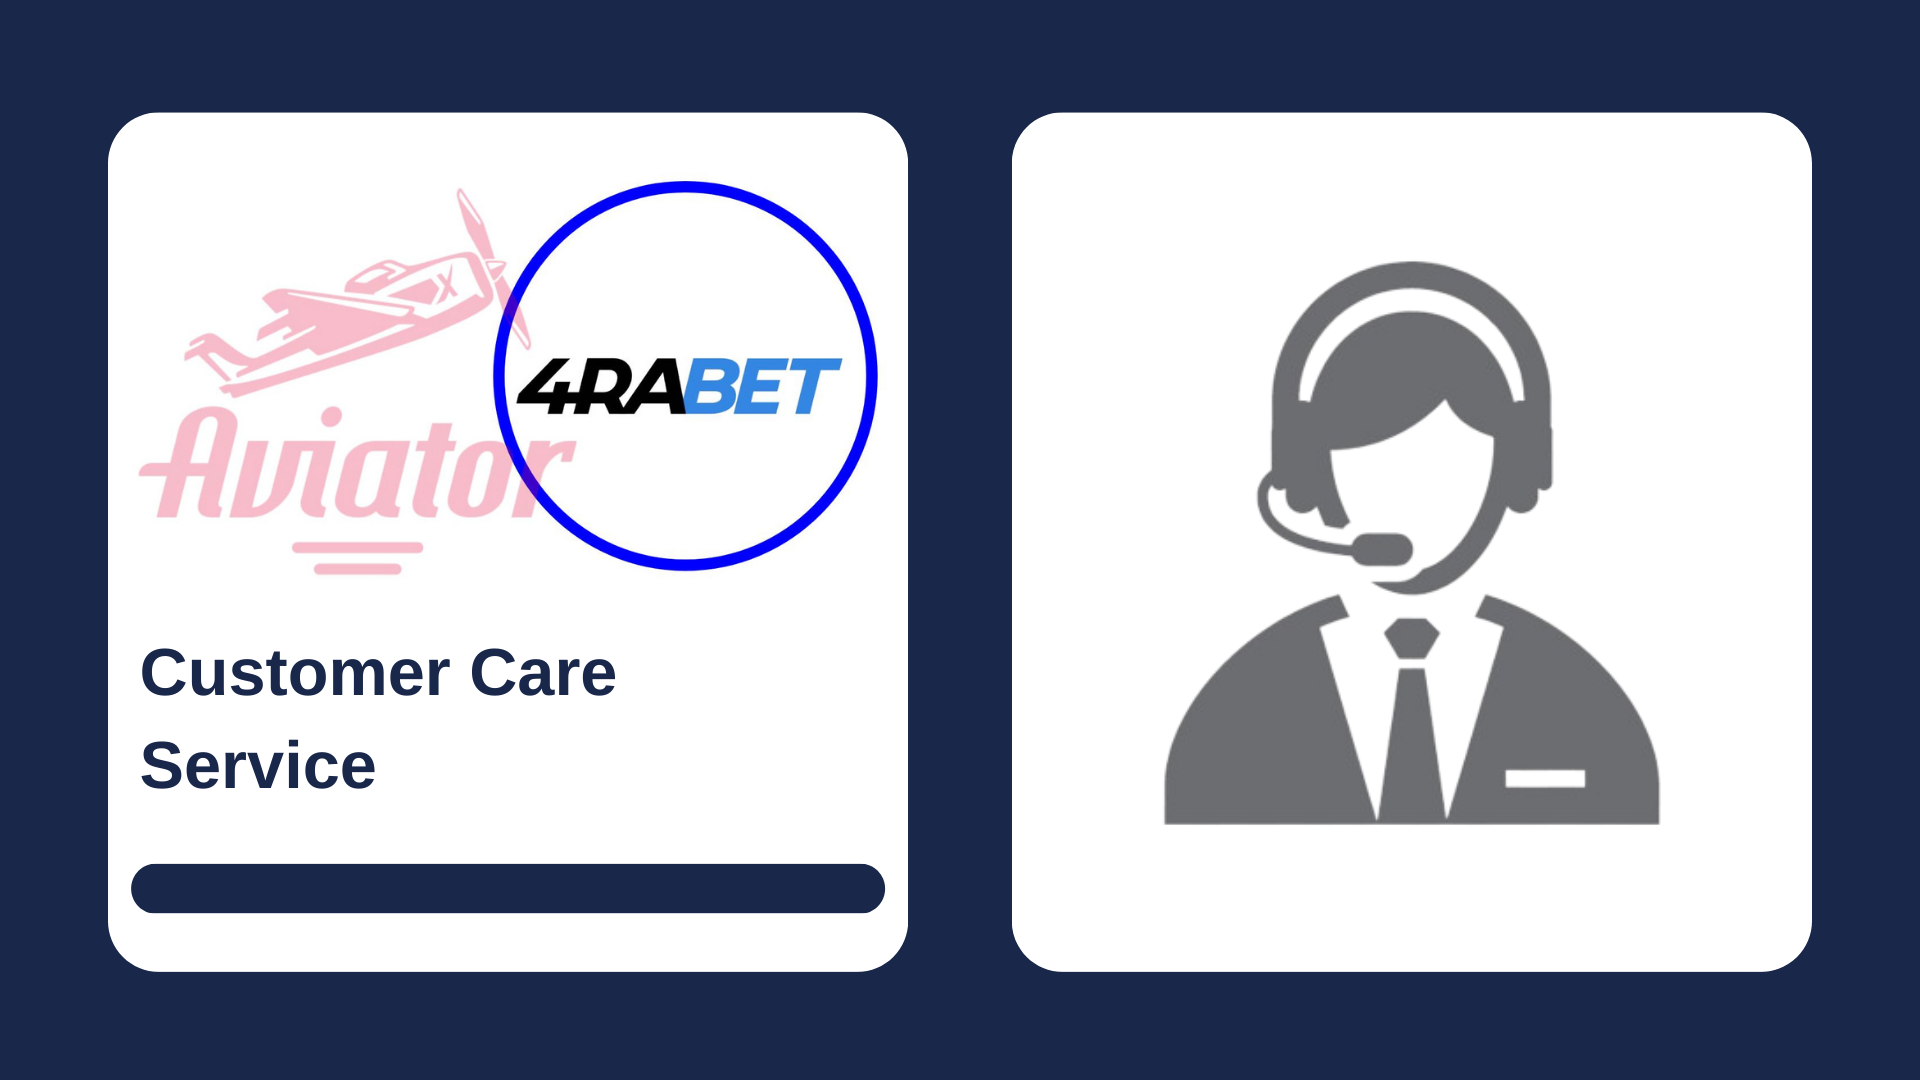 First picture showing Aviator and 4rabet logos, and second - man with headset